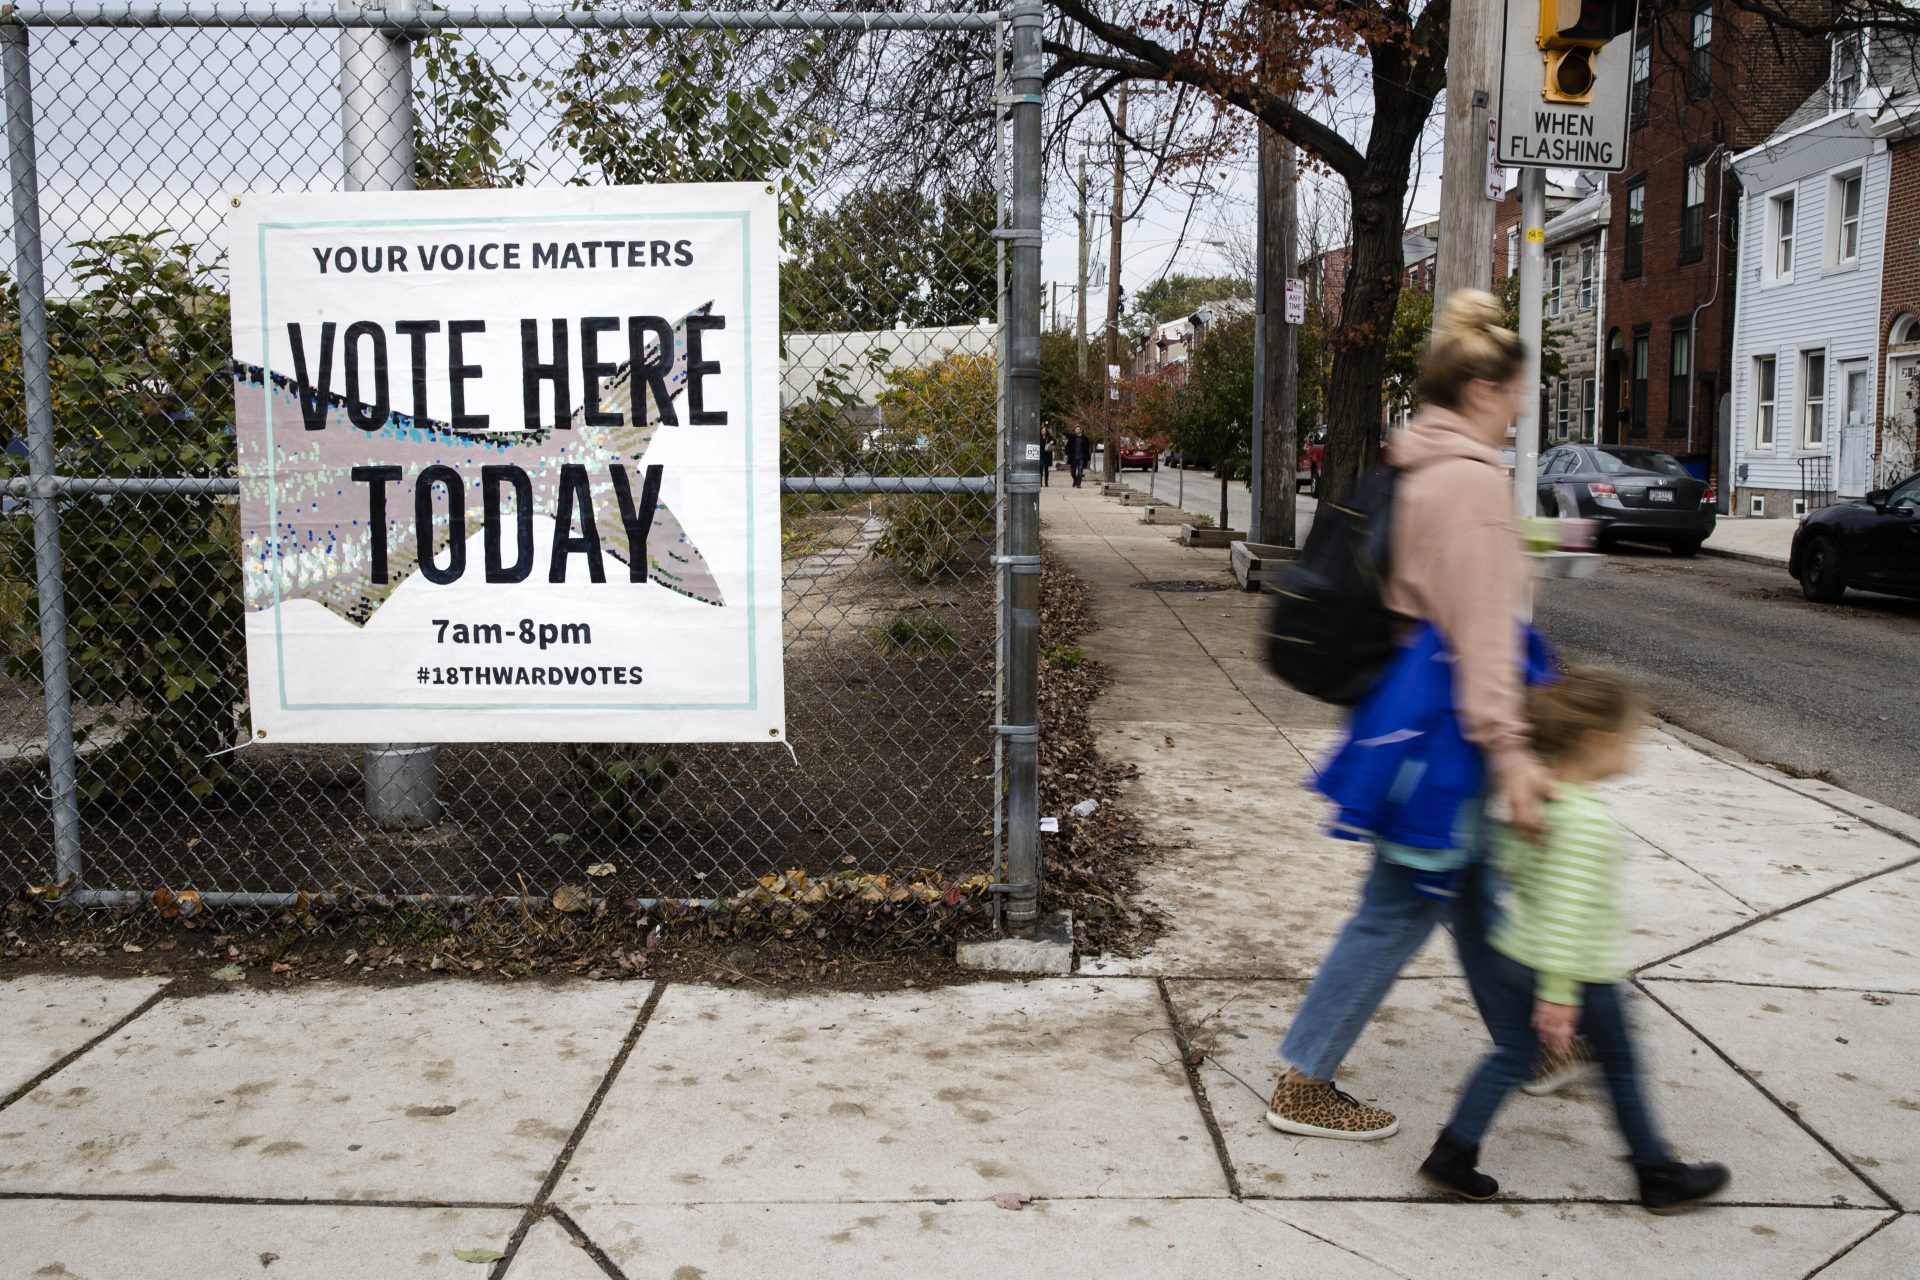 Pedestrians walk past a polling station on Election Day, Tuesday, Nov. 5, 2019 in Philadelphia. Pennsylvania's municipal elections feature contests for two statewide appellate judgeships, as well as some potential firsts in local contests.